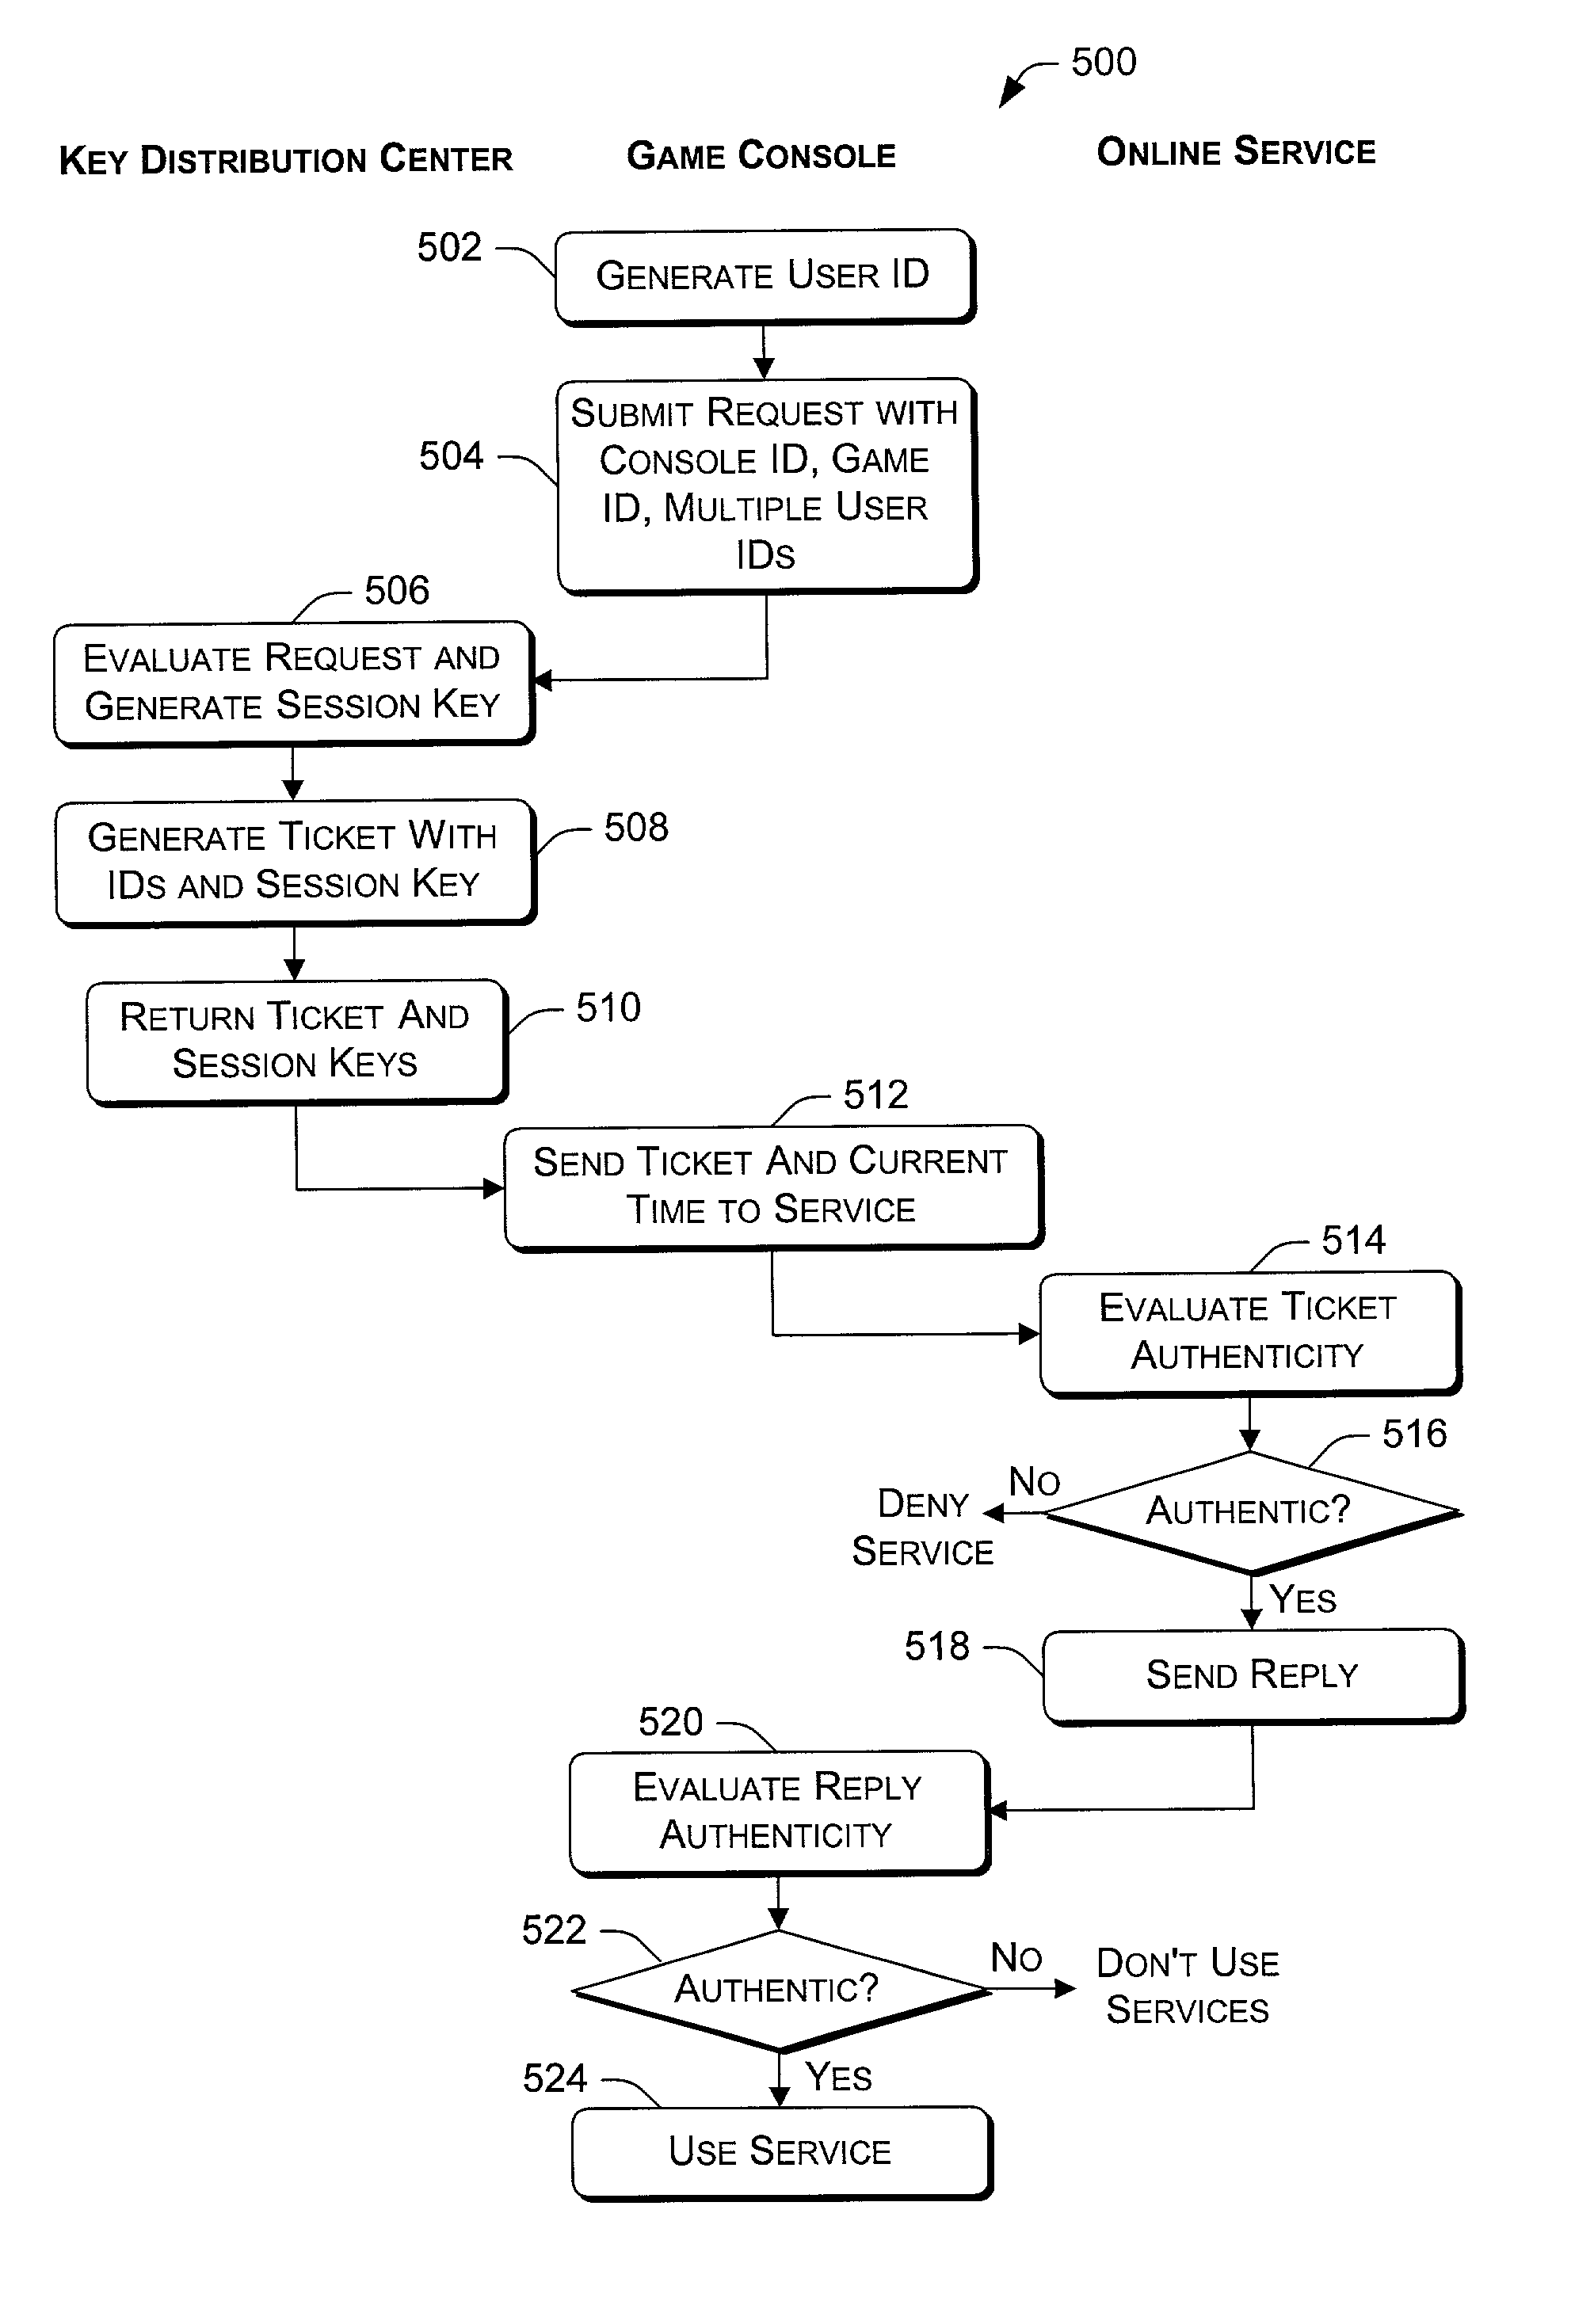 Multiple user authentication for online console-based gaming